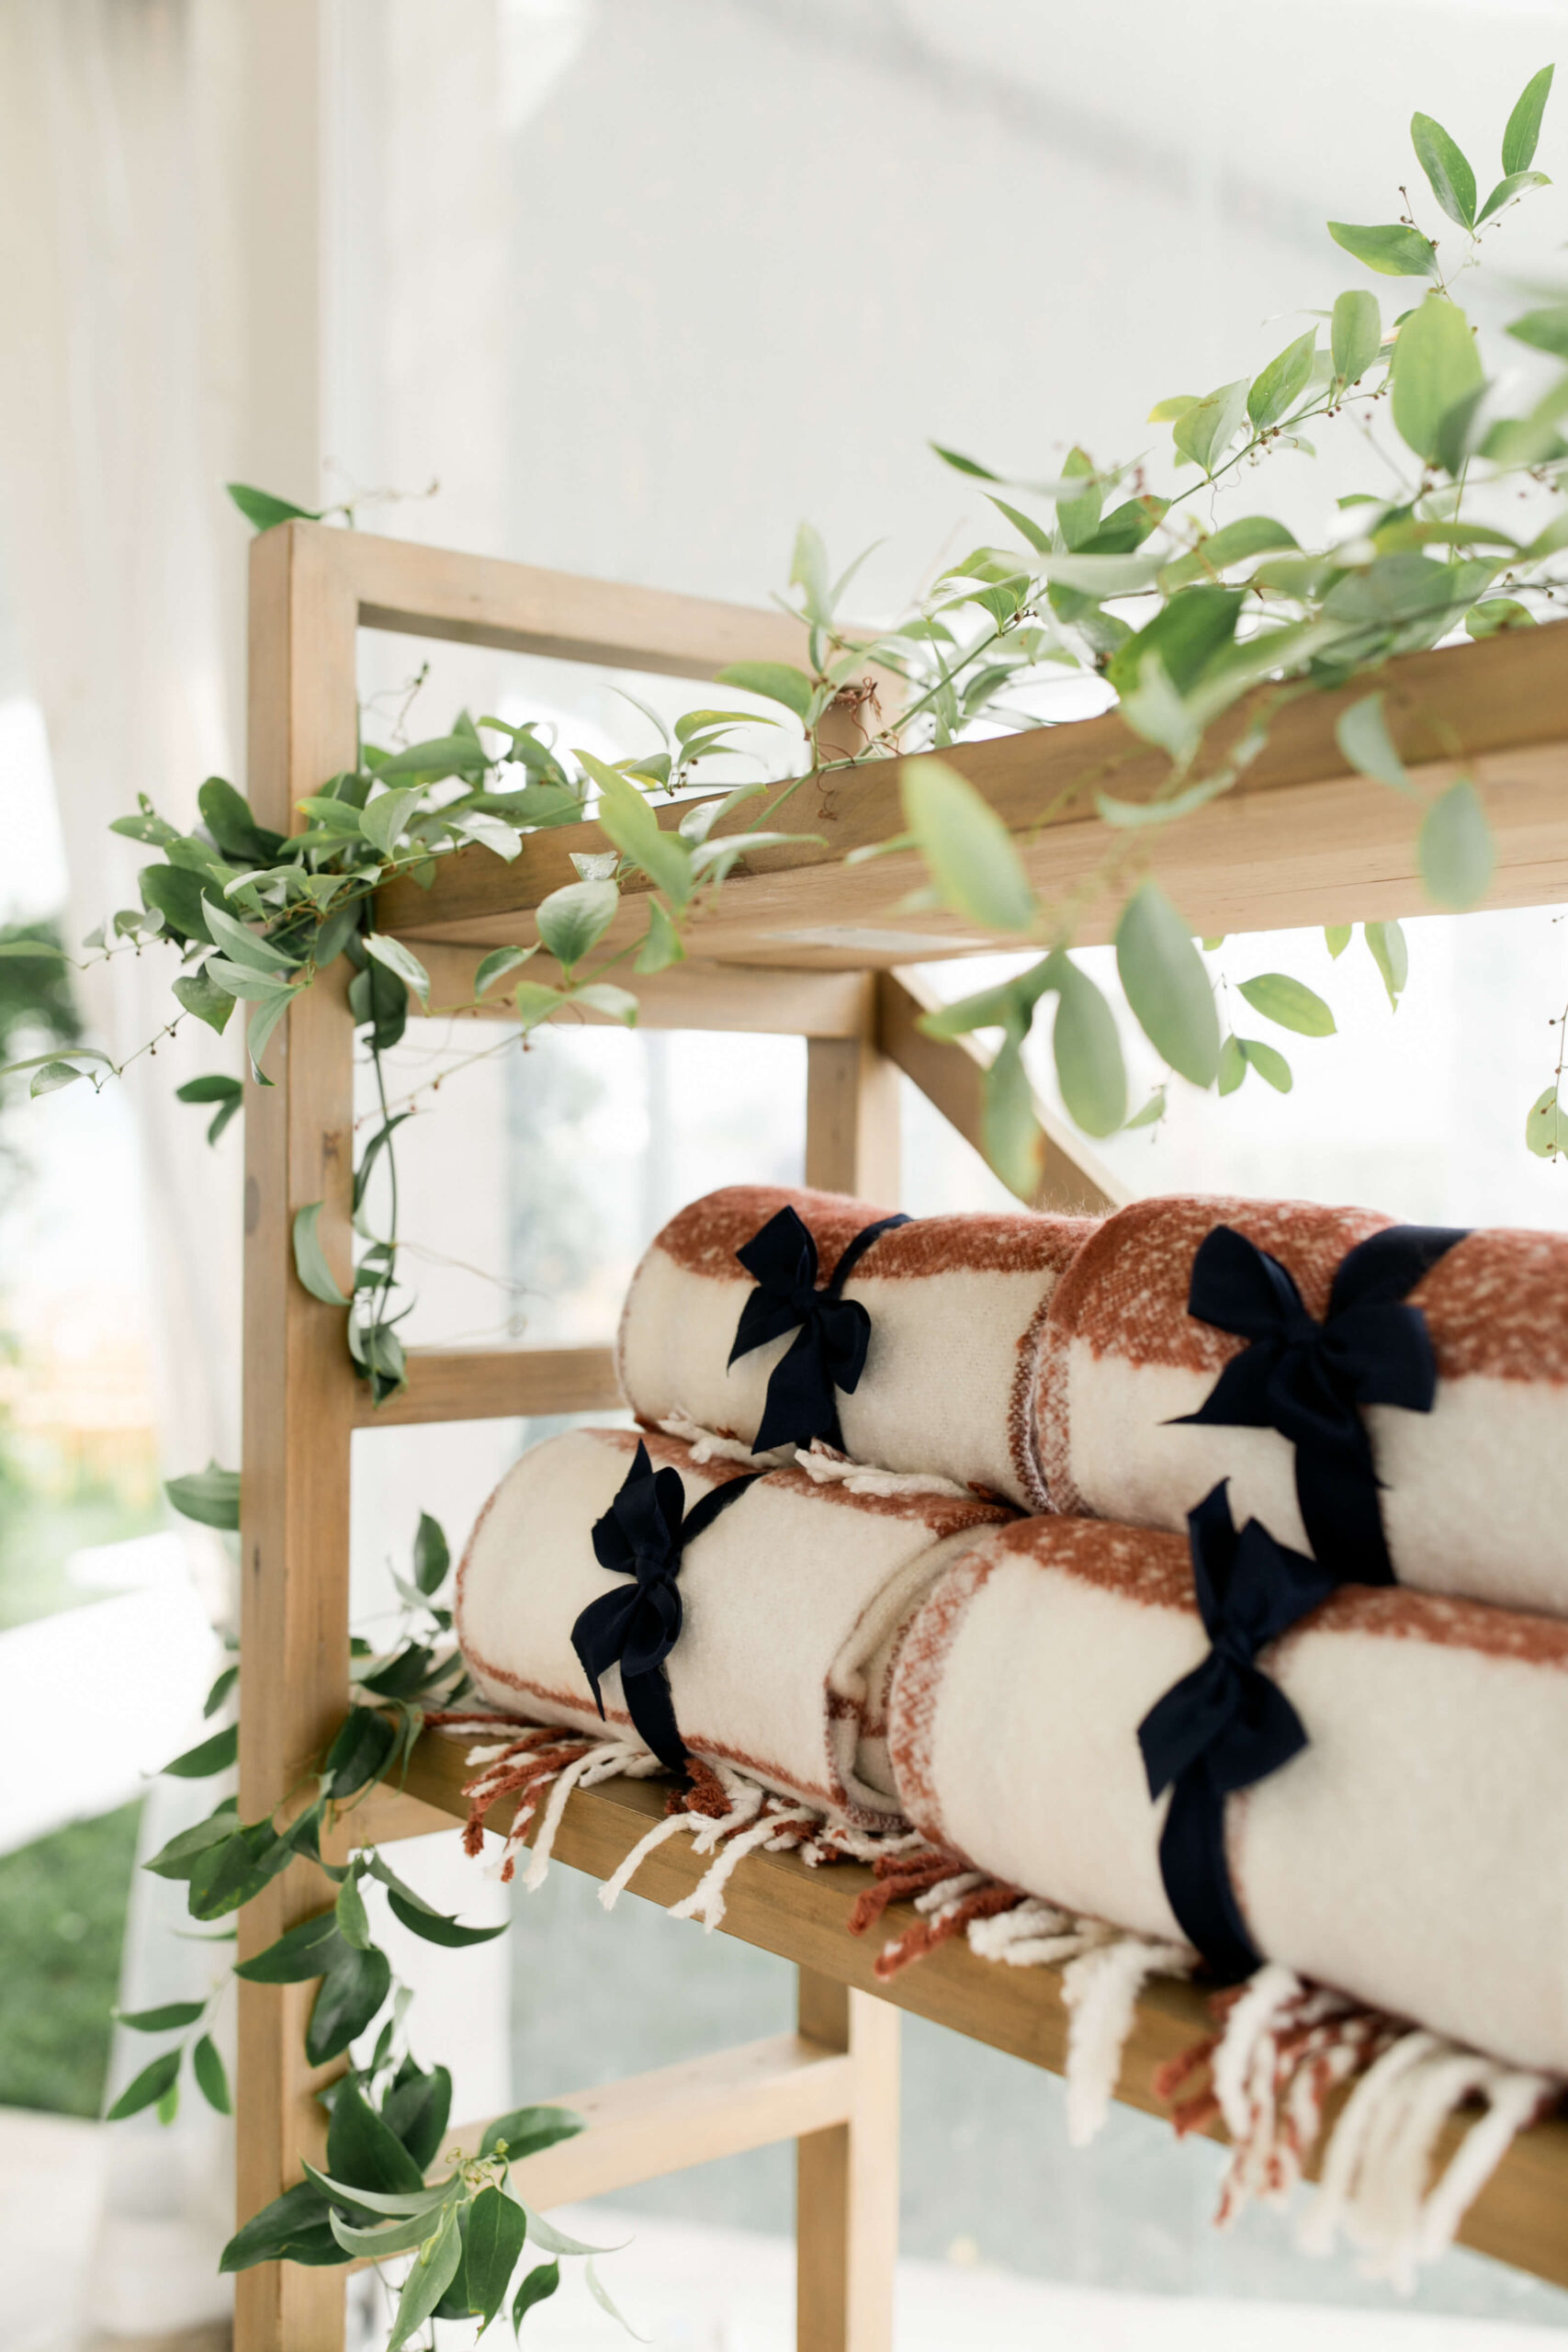 Warm blankets for wedding guests placed on wooden shelf decorated with greenery 